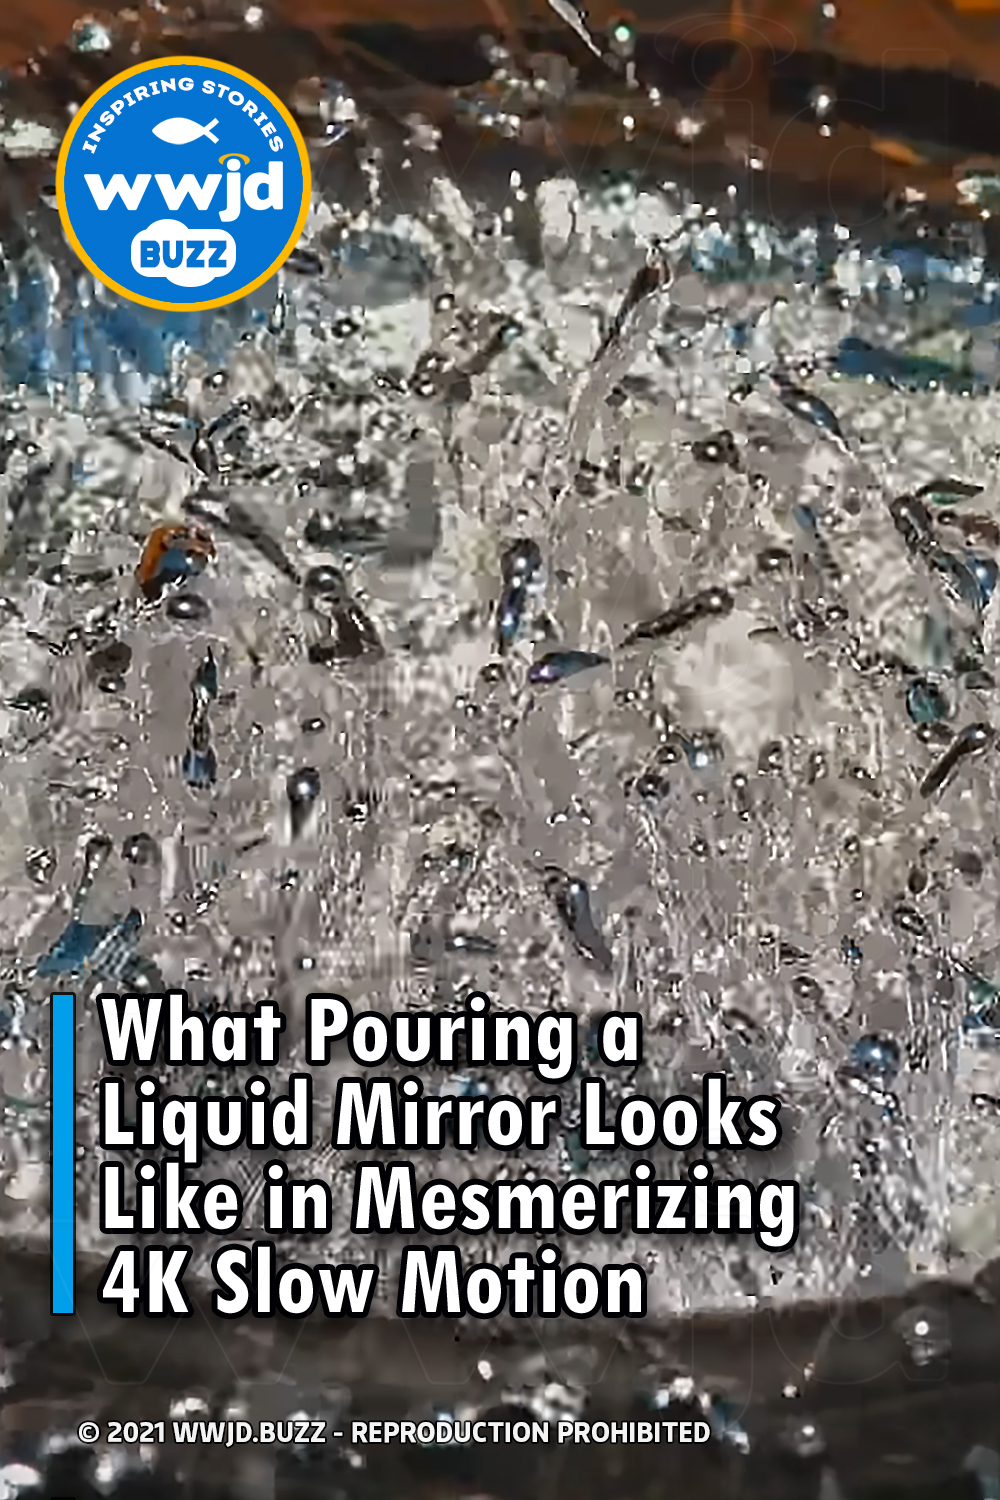 What Pouring a Liquid Mirror Looks Like in Mesmerizing 4K Slow Motion